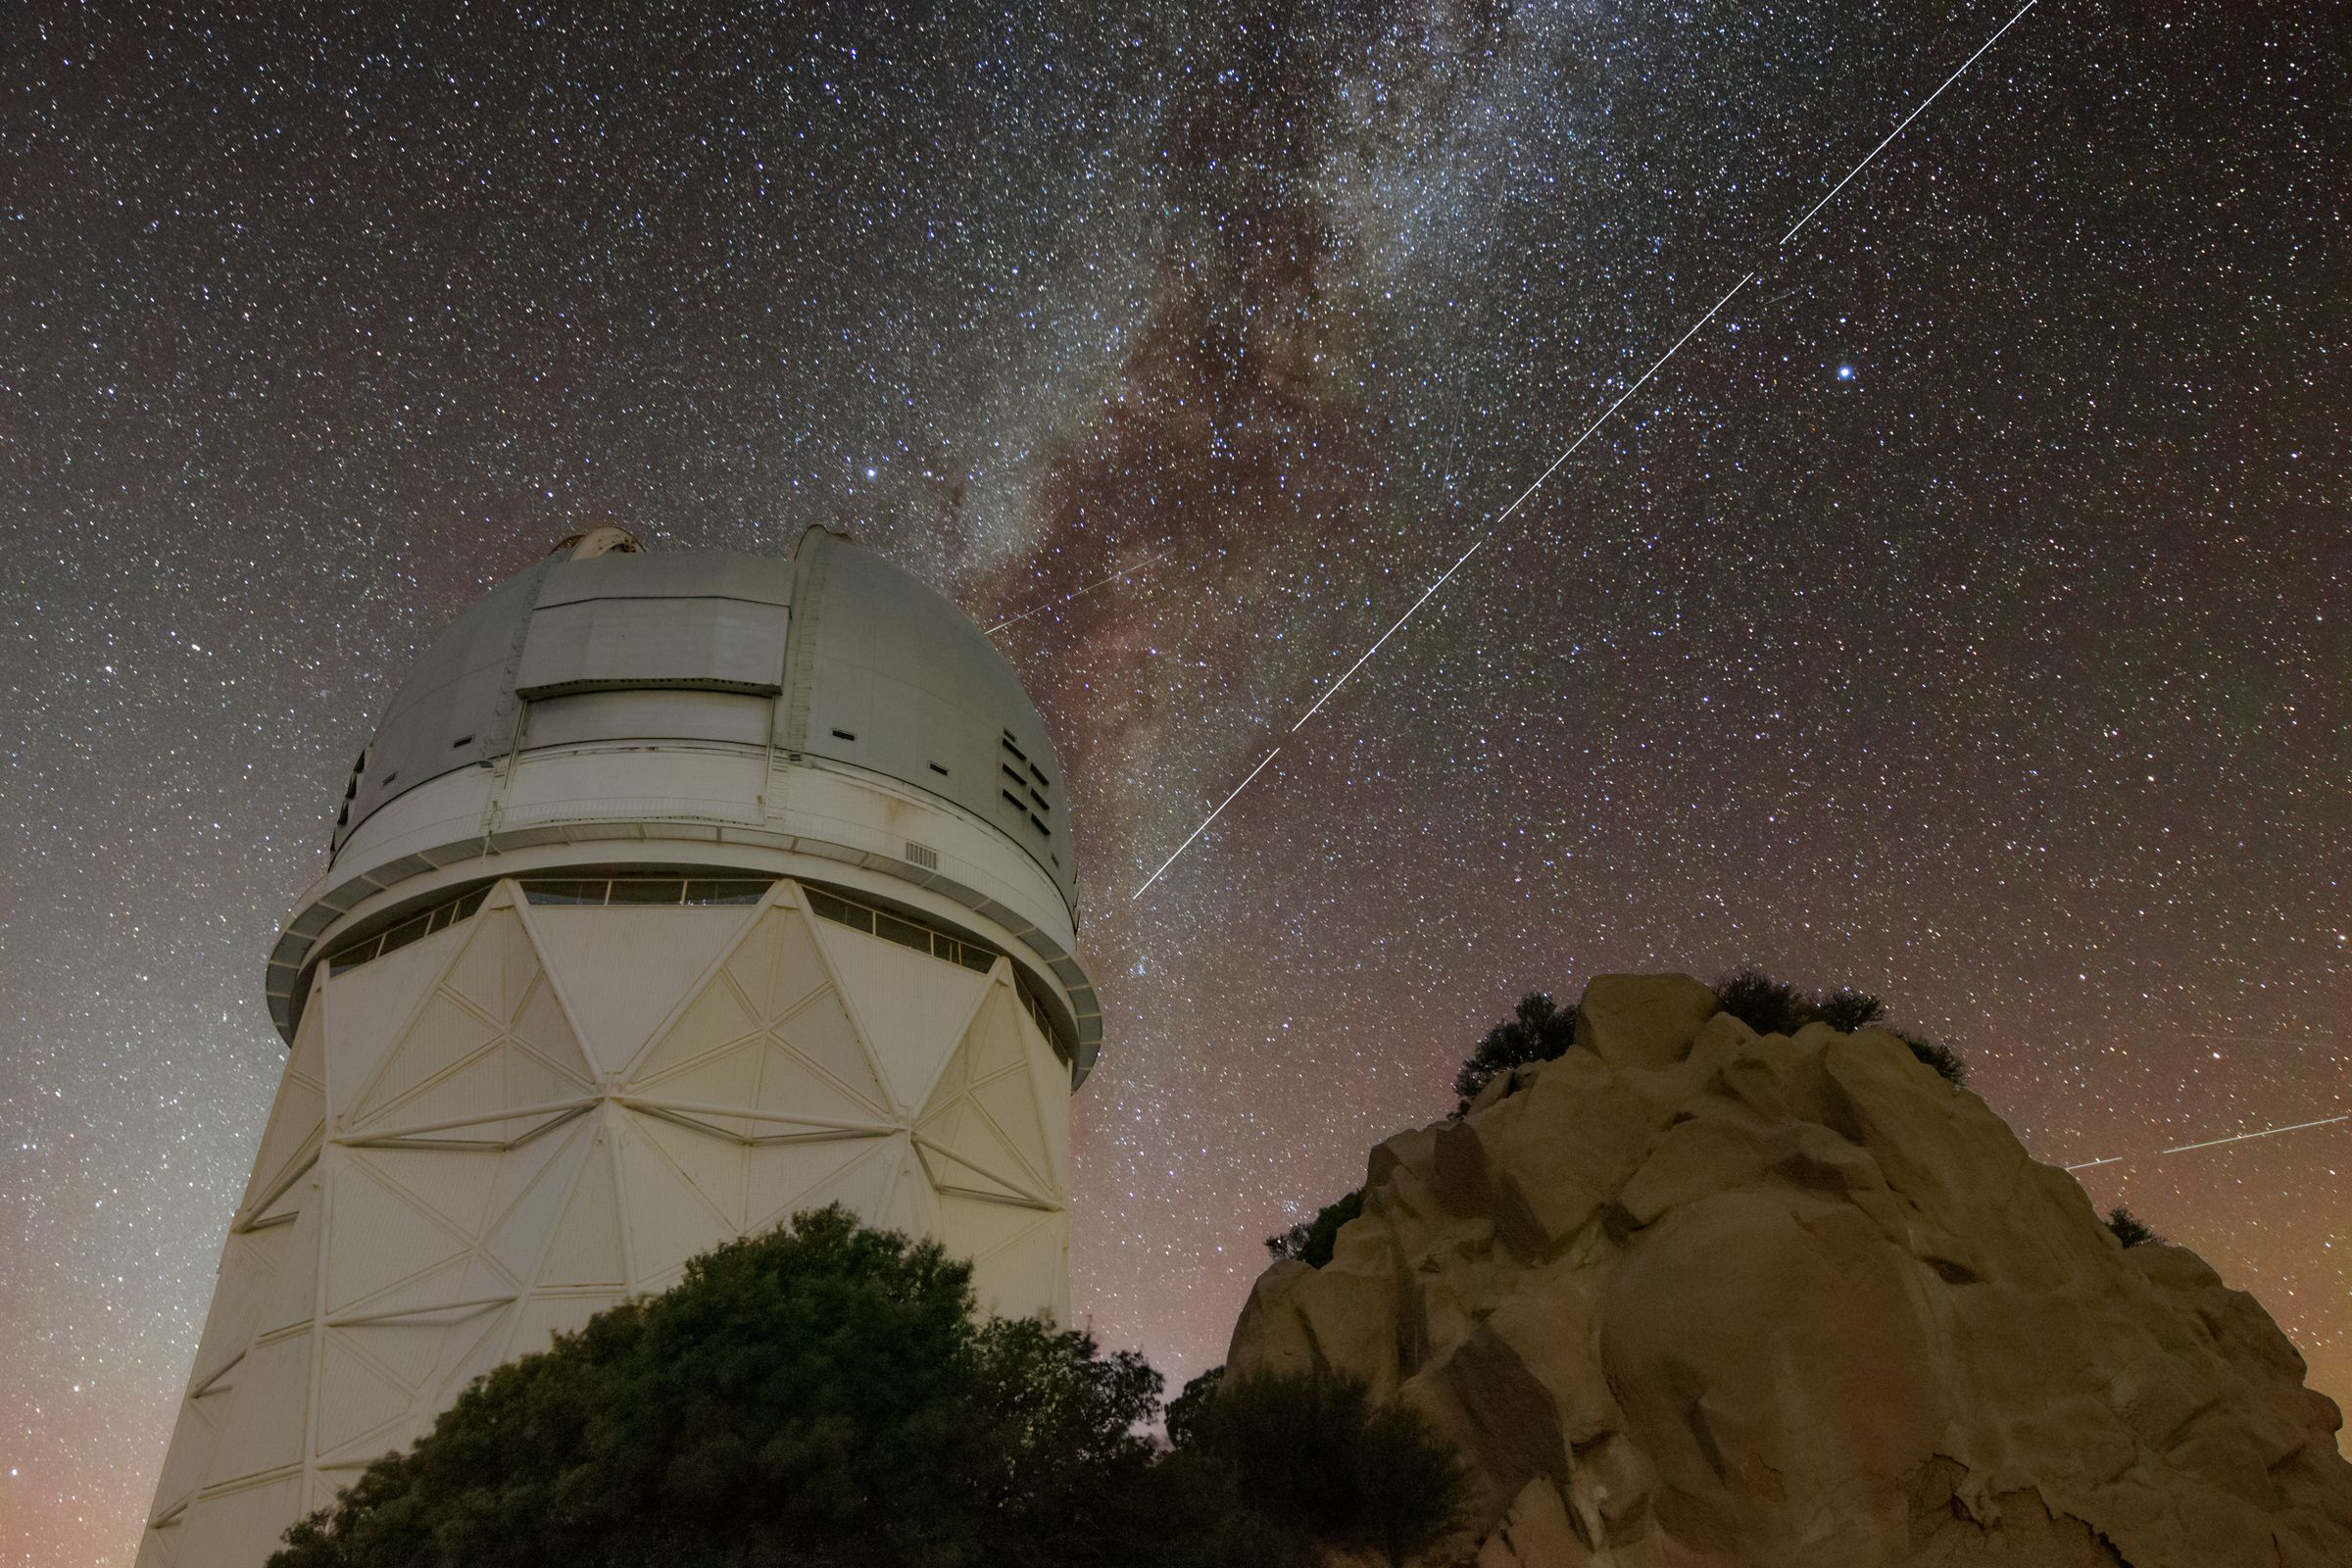 Bright white streaks across a glorious night sky.  A domed telescope and rock dominate the bottom of the photo.